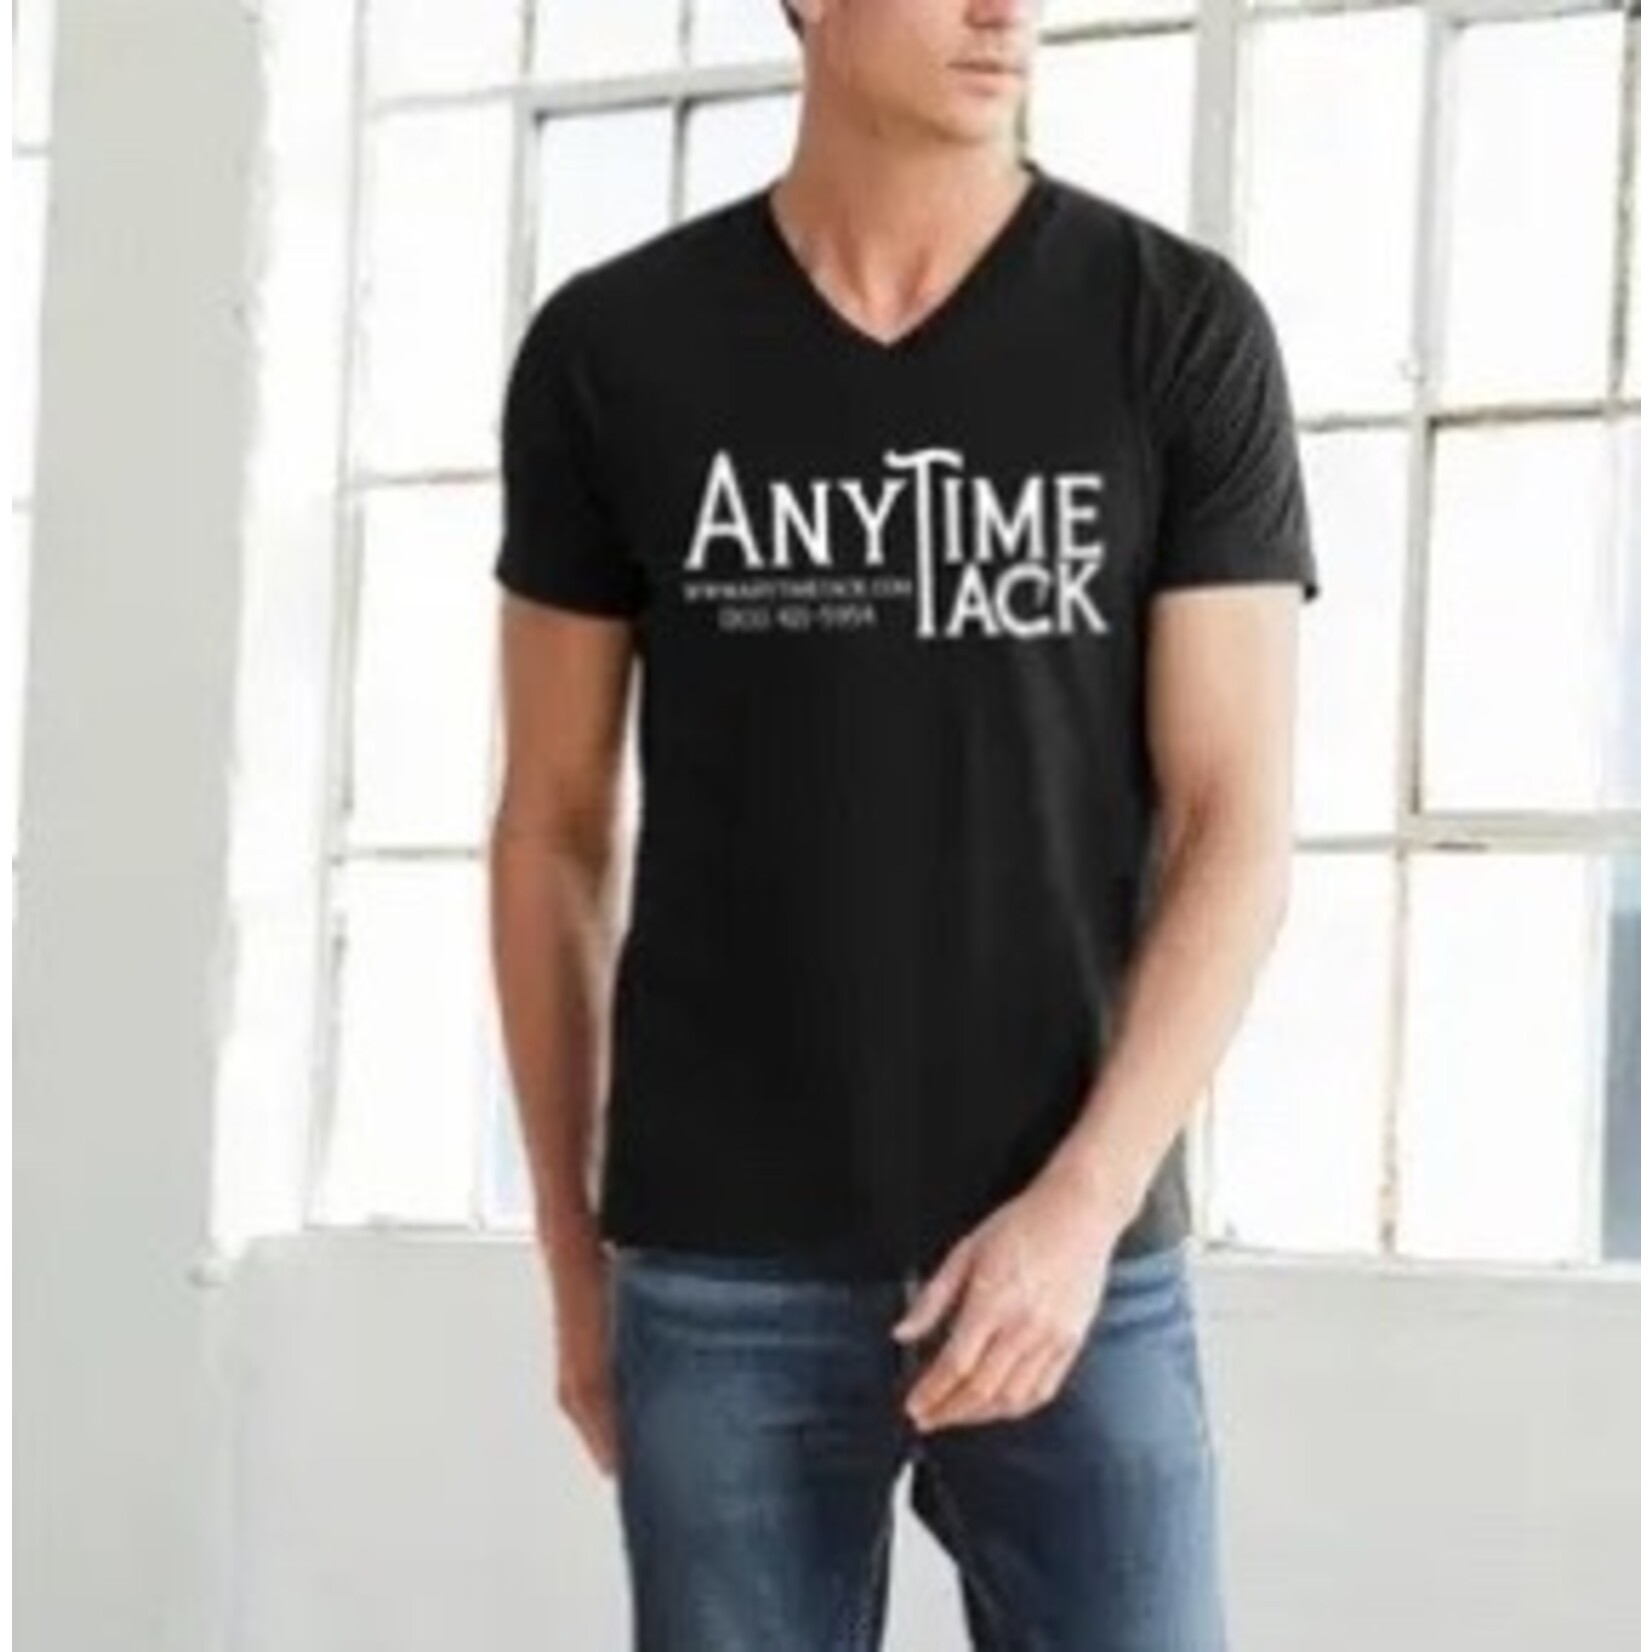 Timeless Anytime Tack T-Shirt